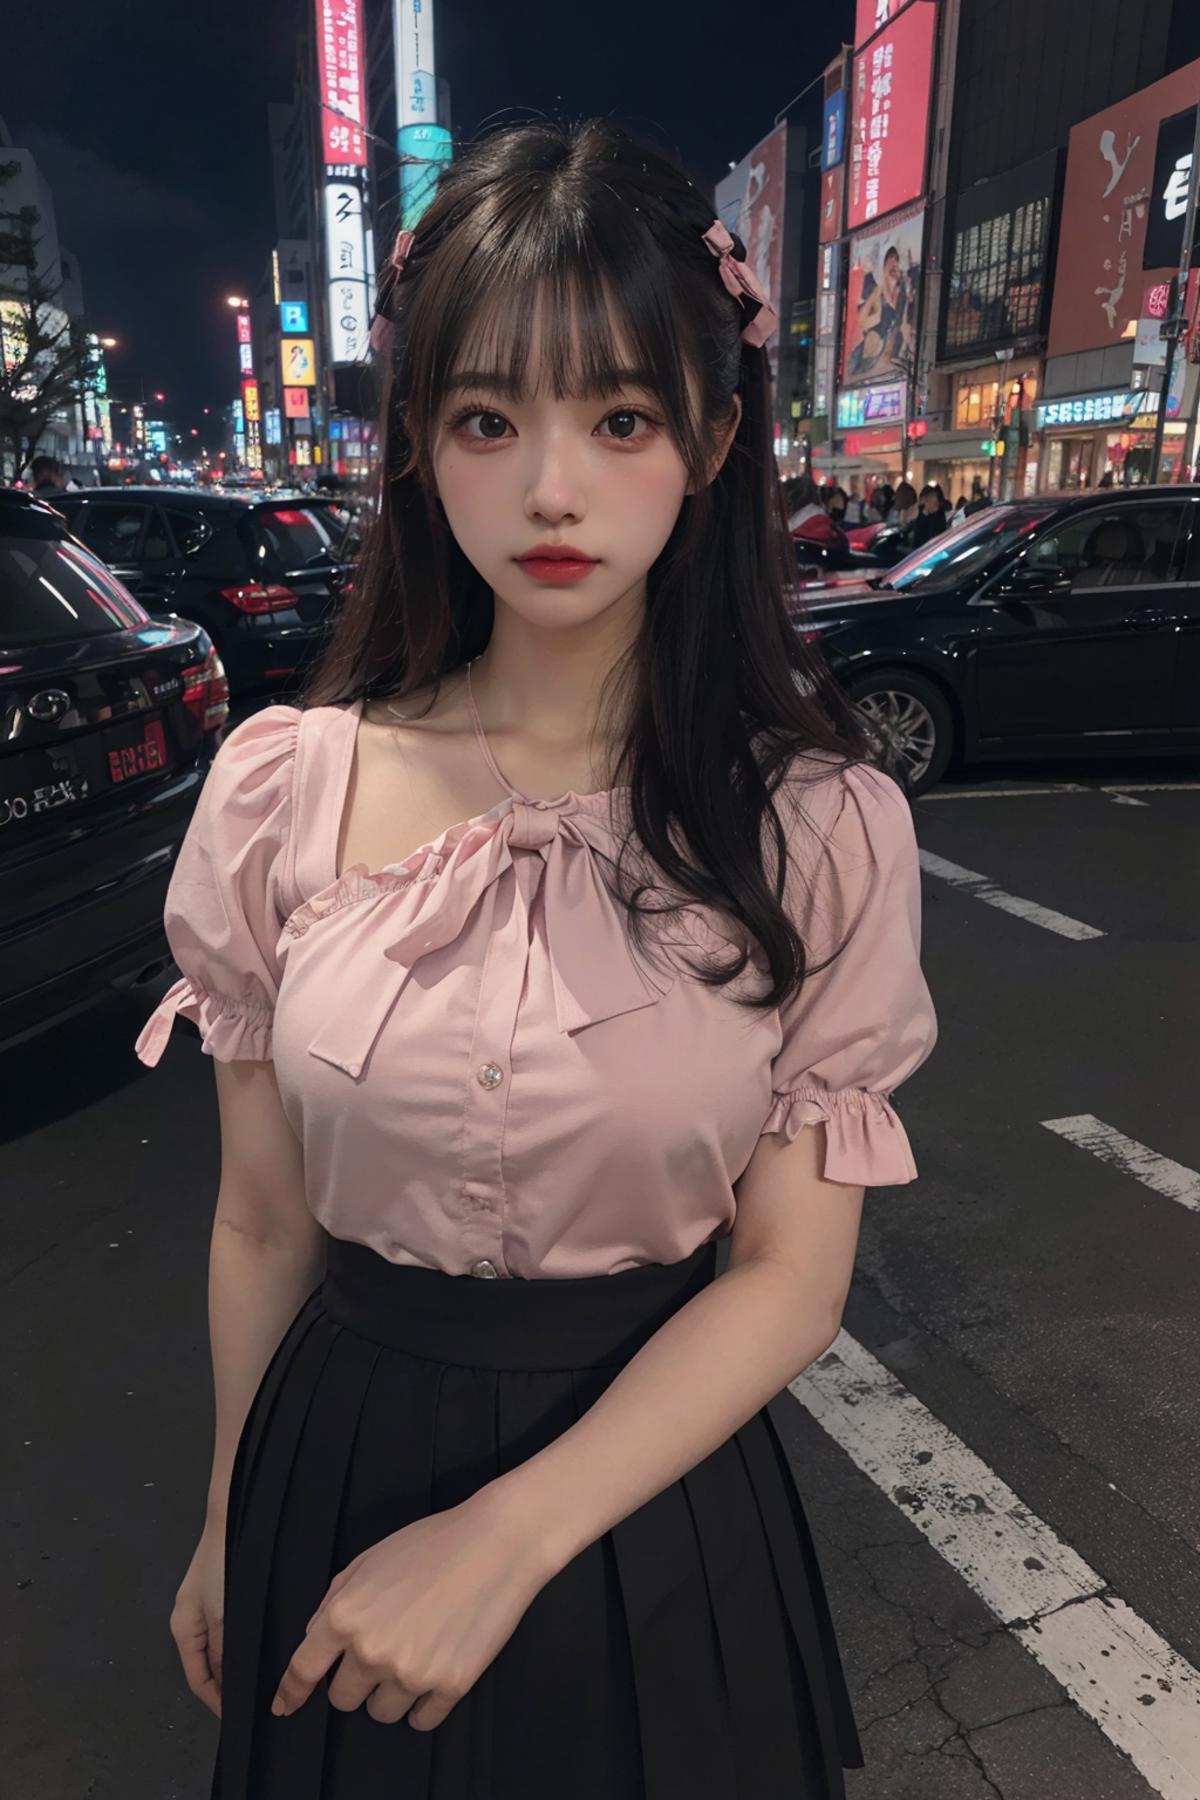 Woman in Pink Shirt with Black Skirt Posing in Busy City Street.